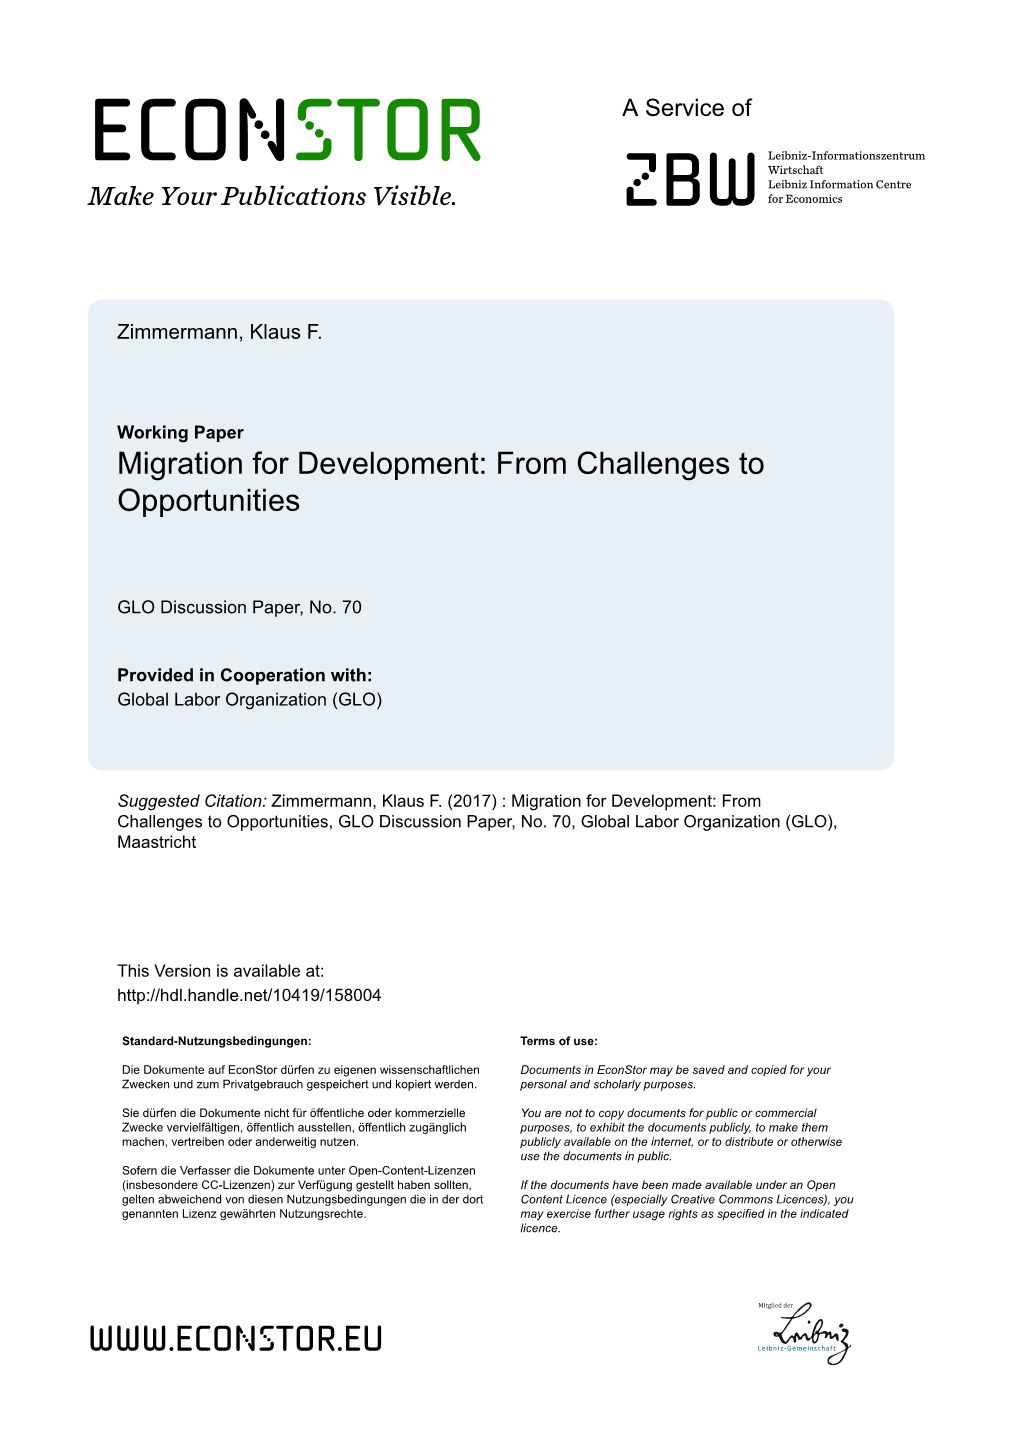 Migration for Development: from Challenges to Opportunities